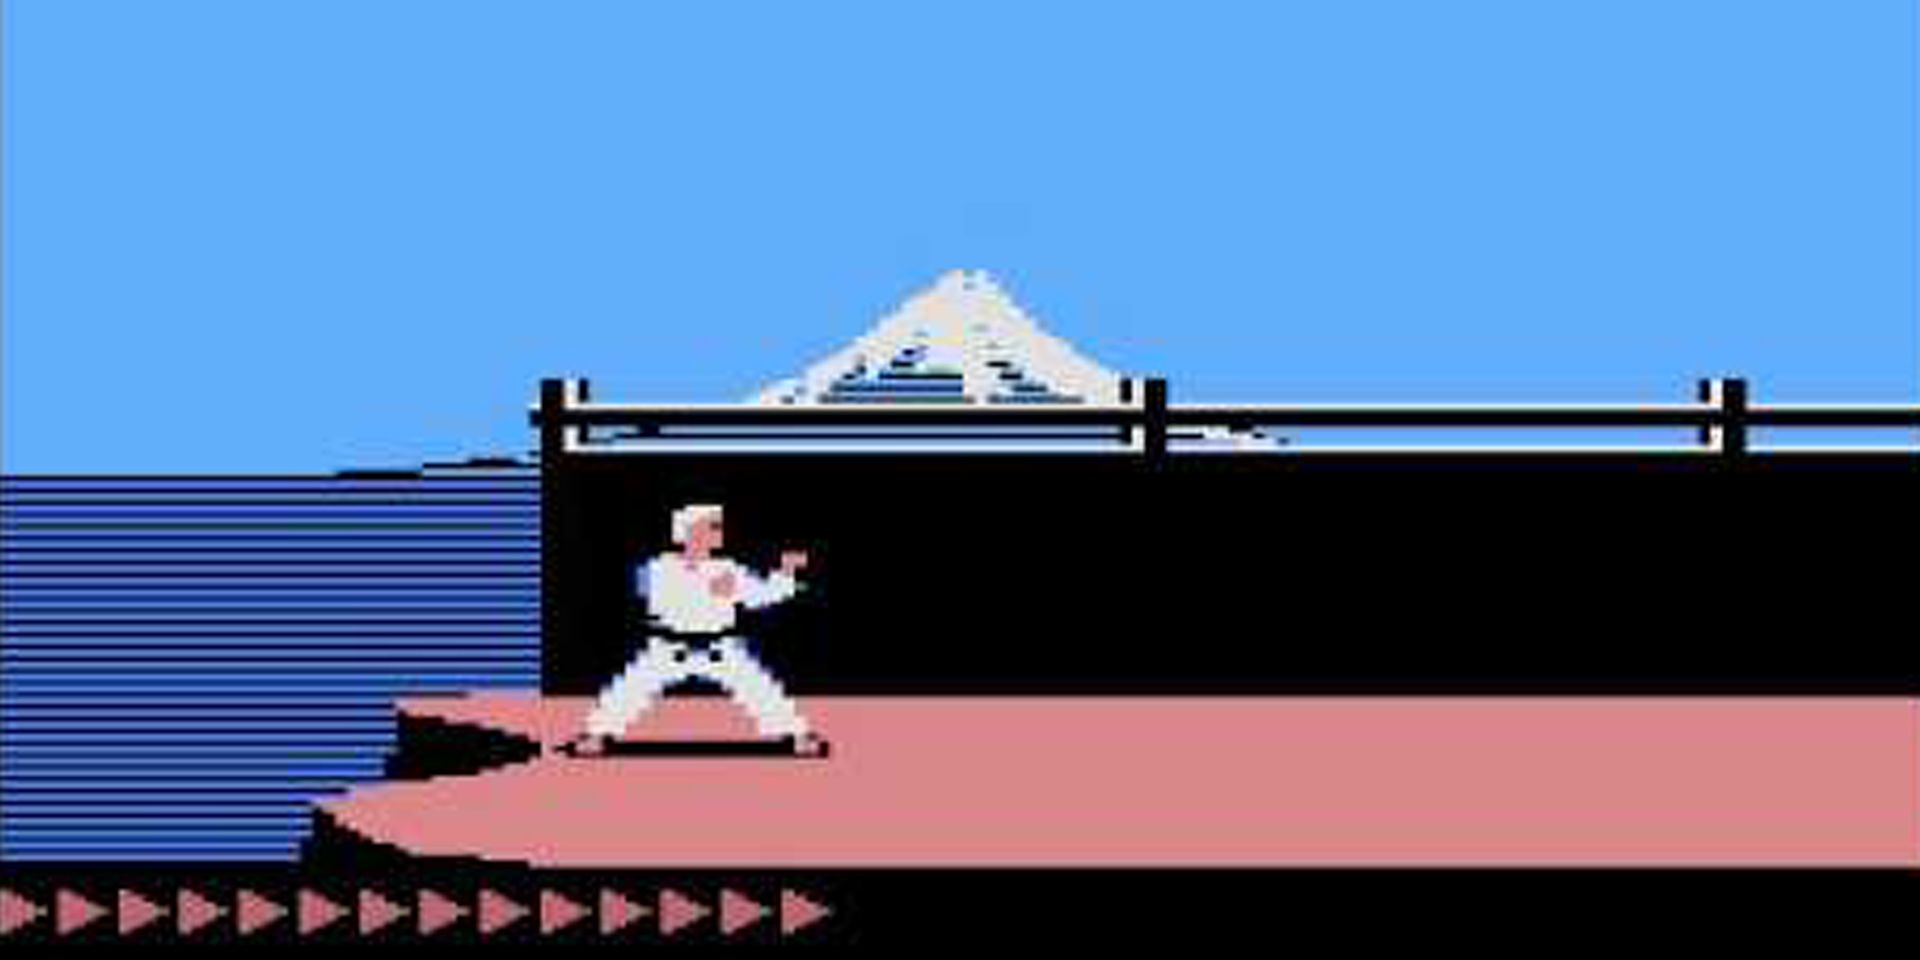 The hero stands on the mountain in Karateka.